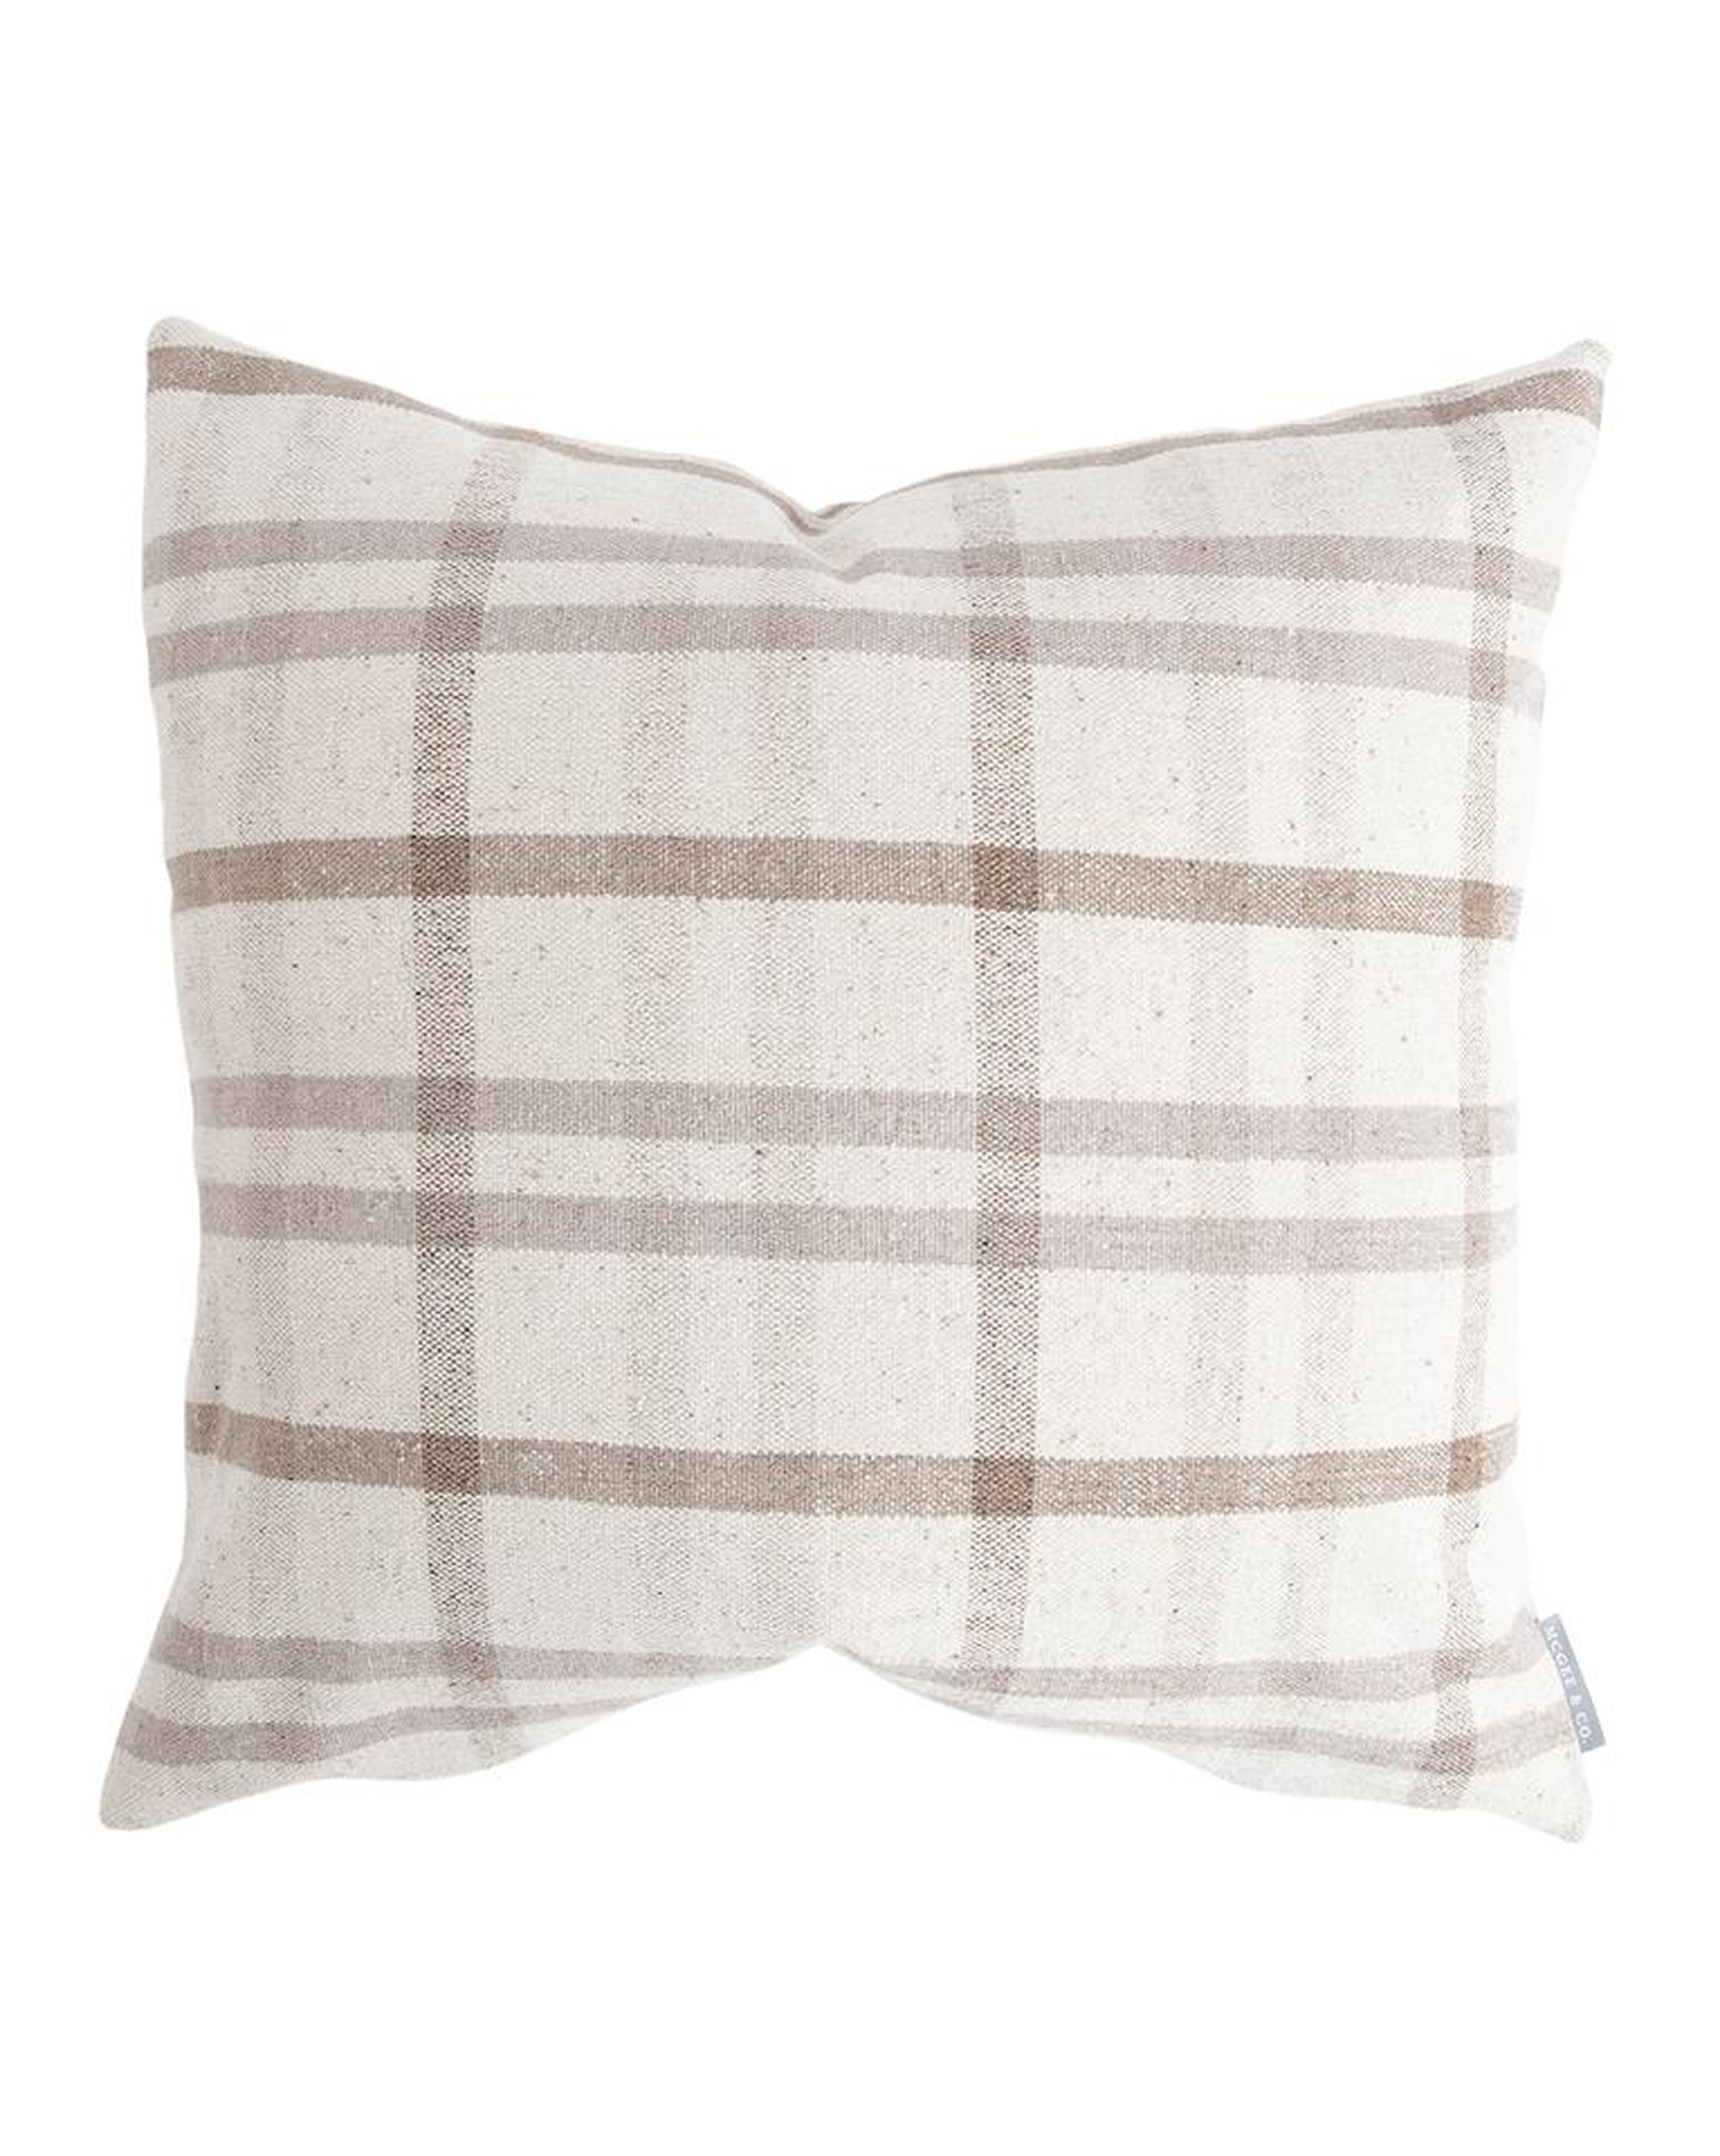 DARCY PILLOW COVER-Pillow cover only - McGee & Co.